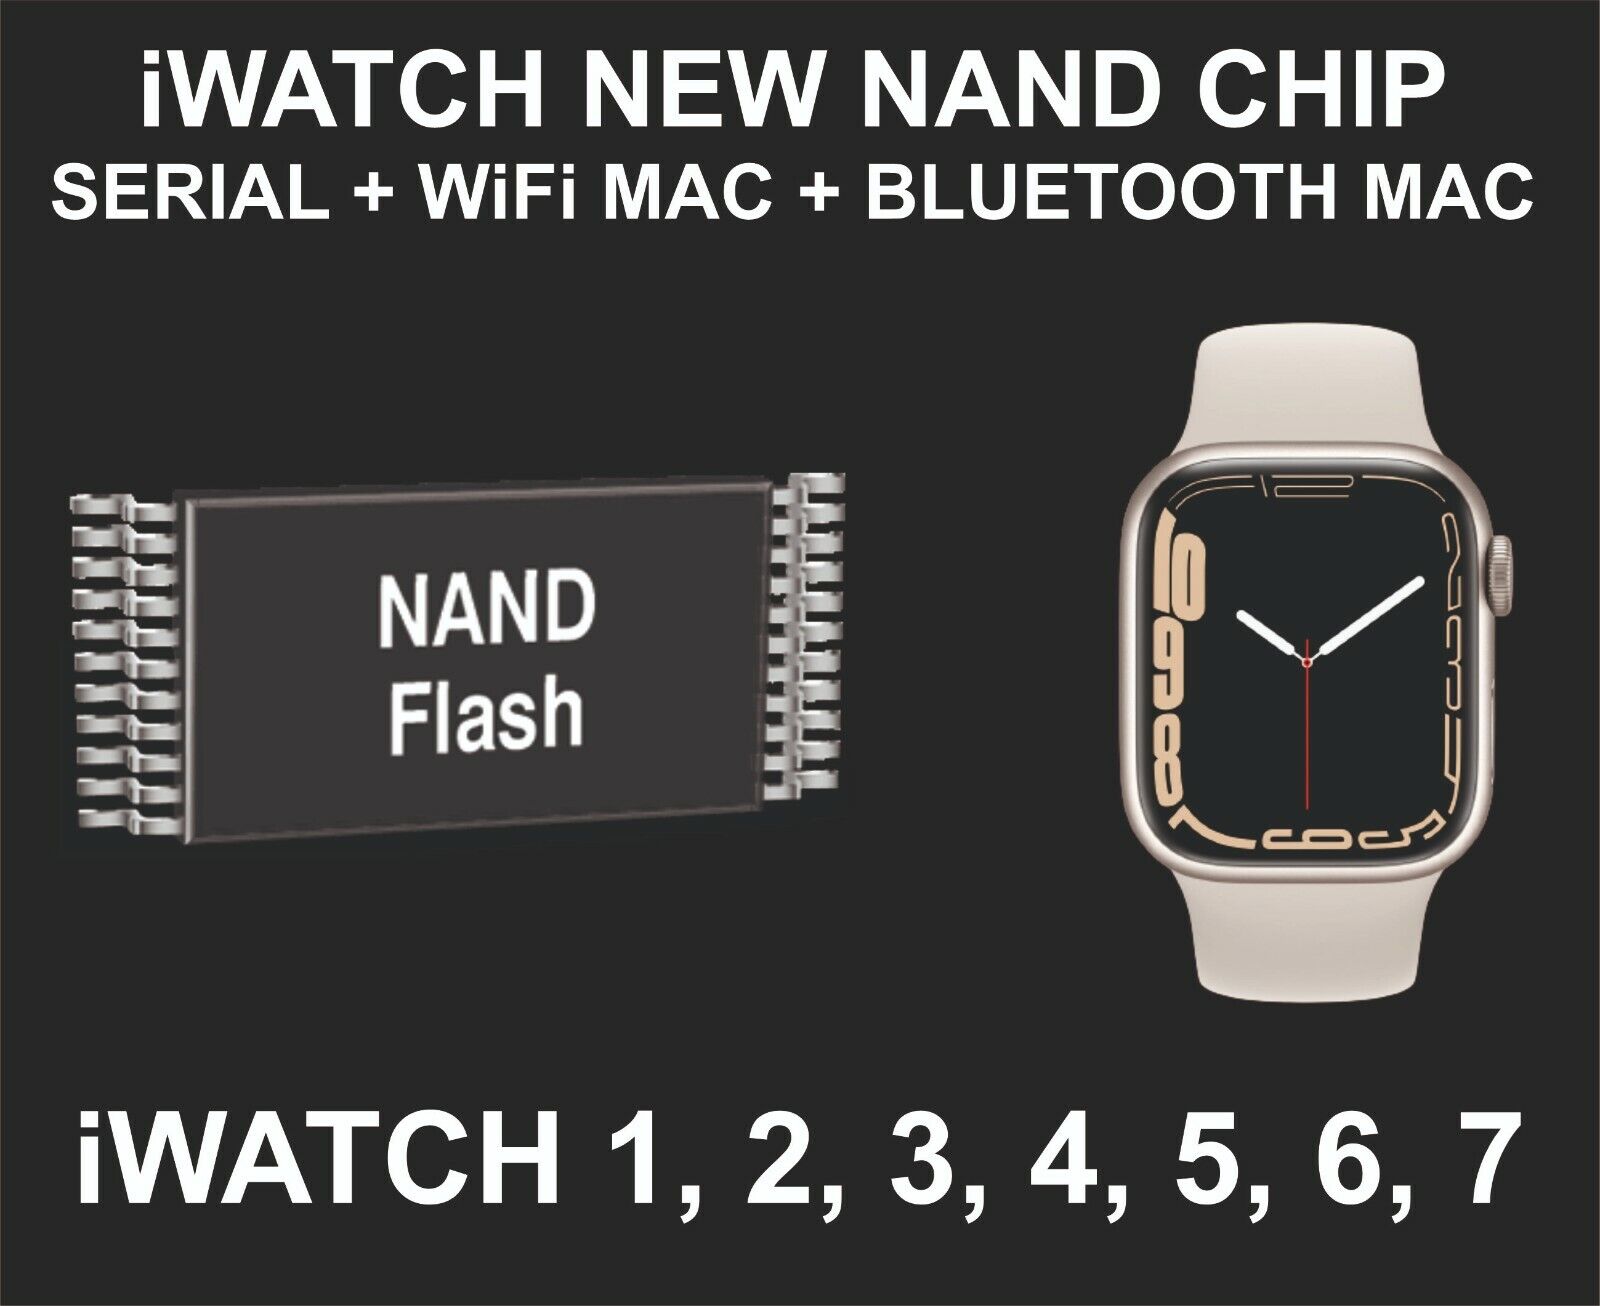 New Nand Chip Data, Serial Number, Wifi Mac, Bluetooth Mac, For Iwatch Devices